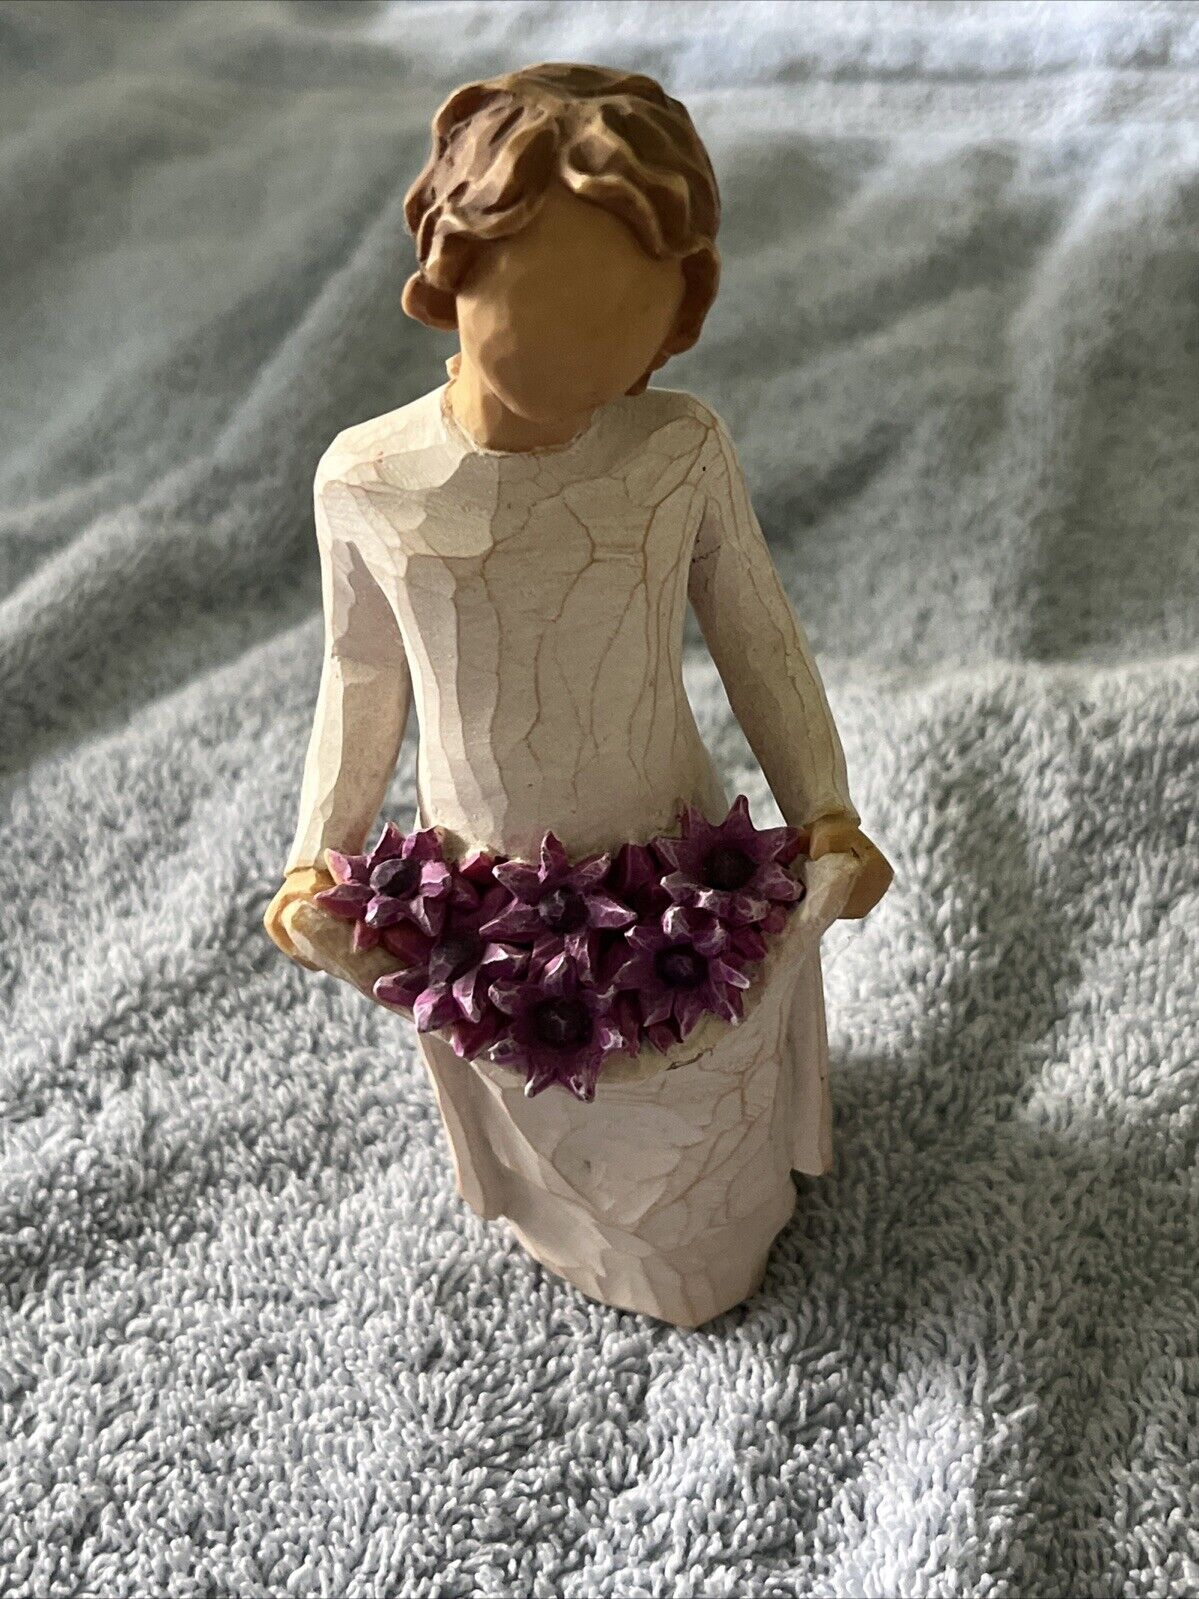 Willow Tree Simple Joys Sculpted Hand-Painted Figure Girl With Flowers 2013